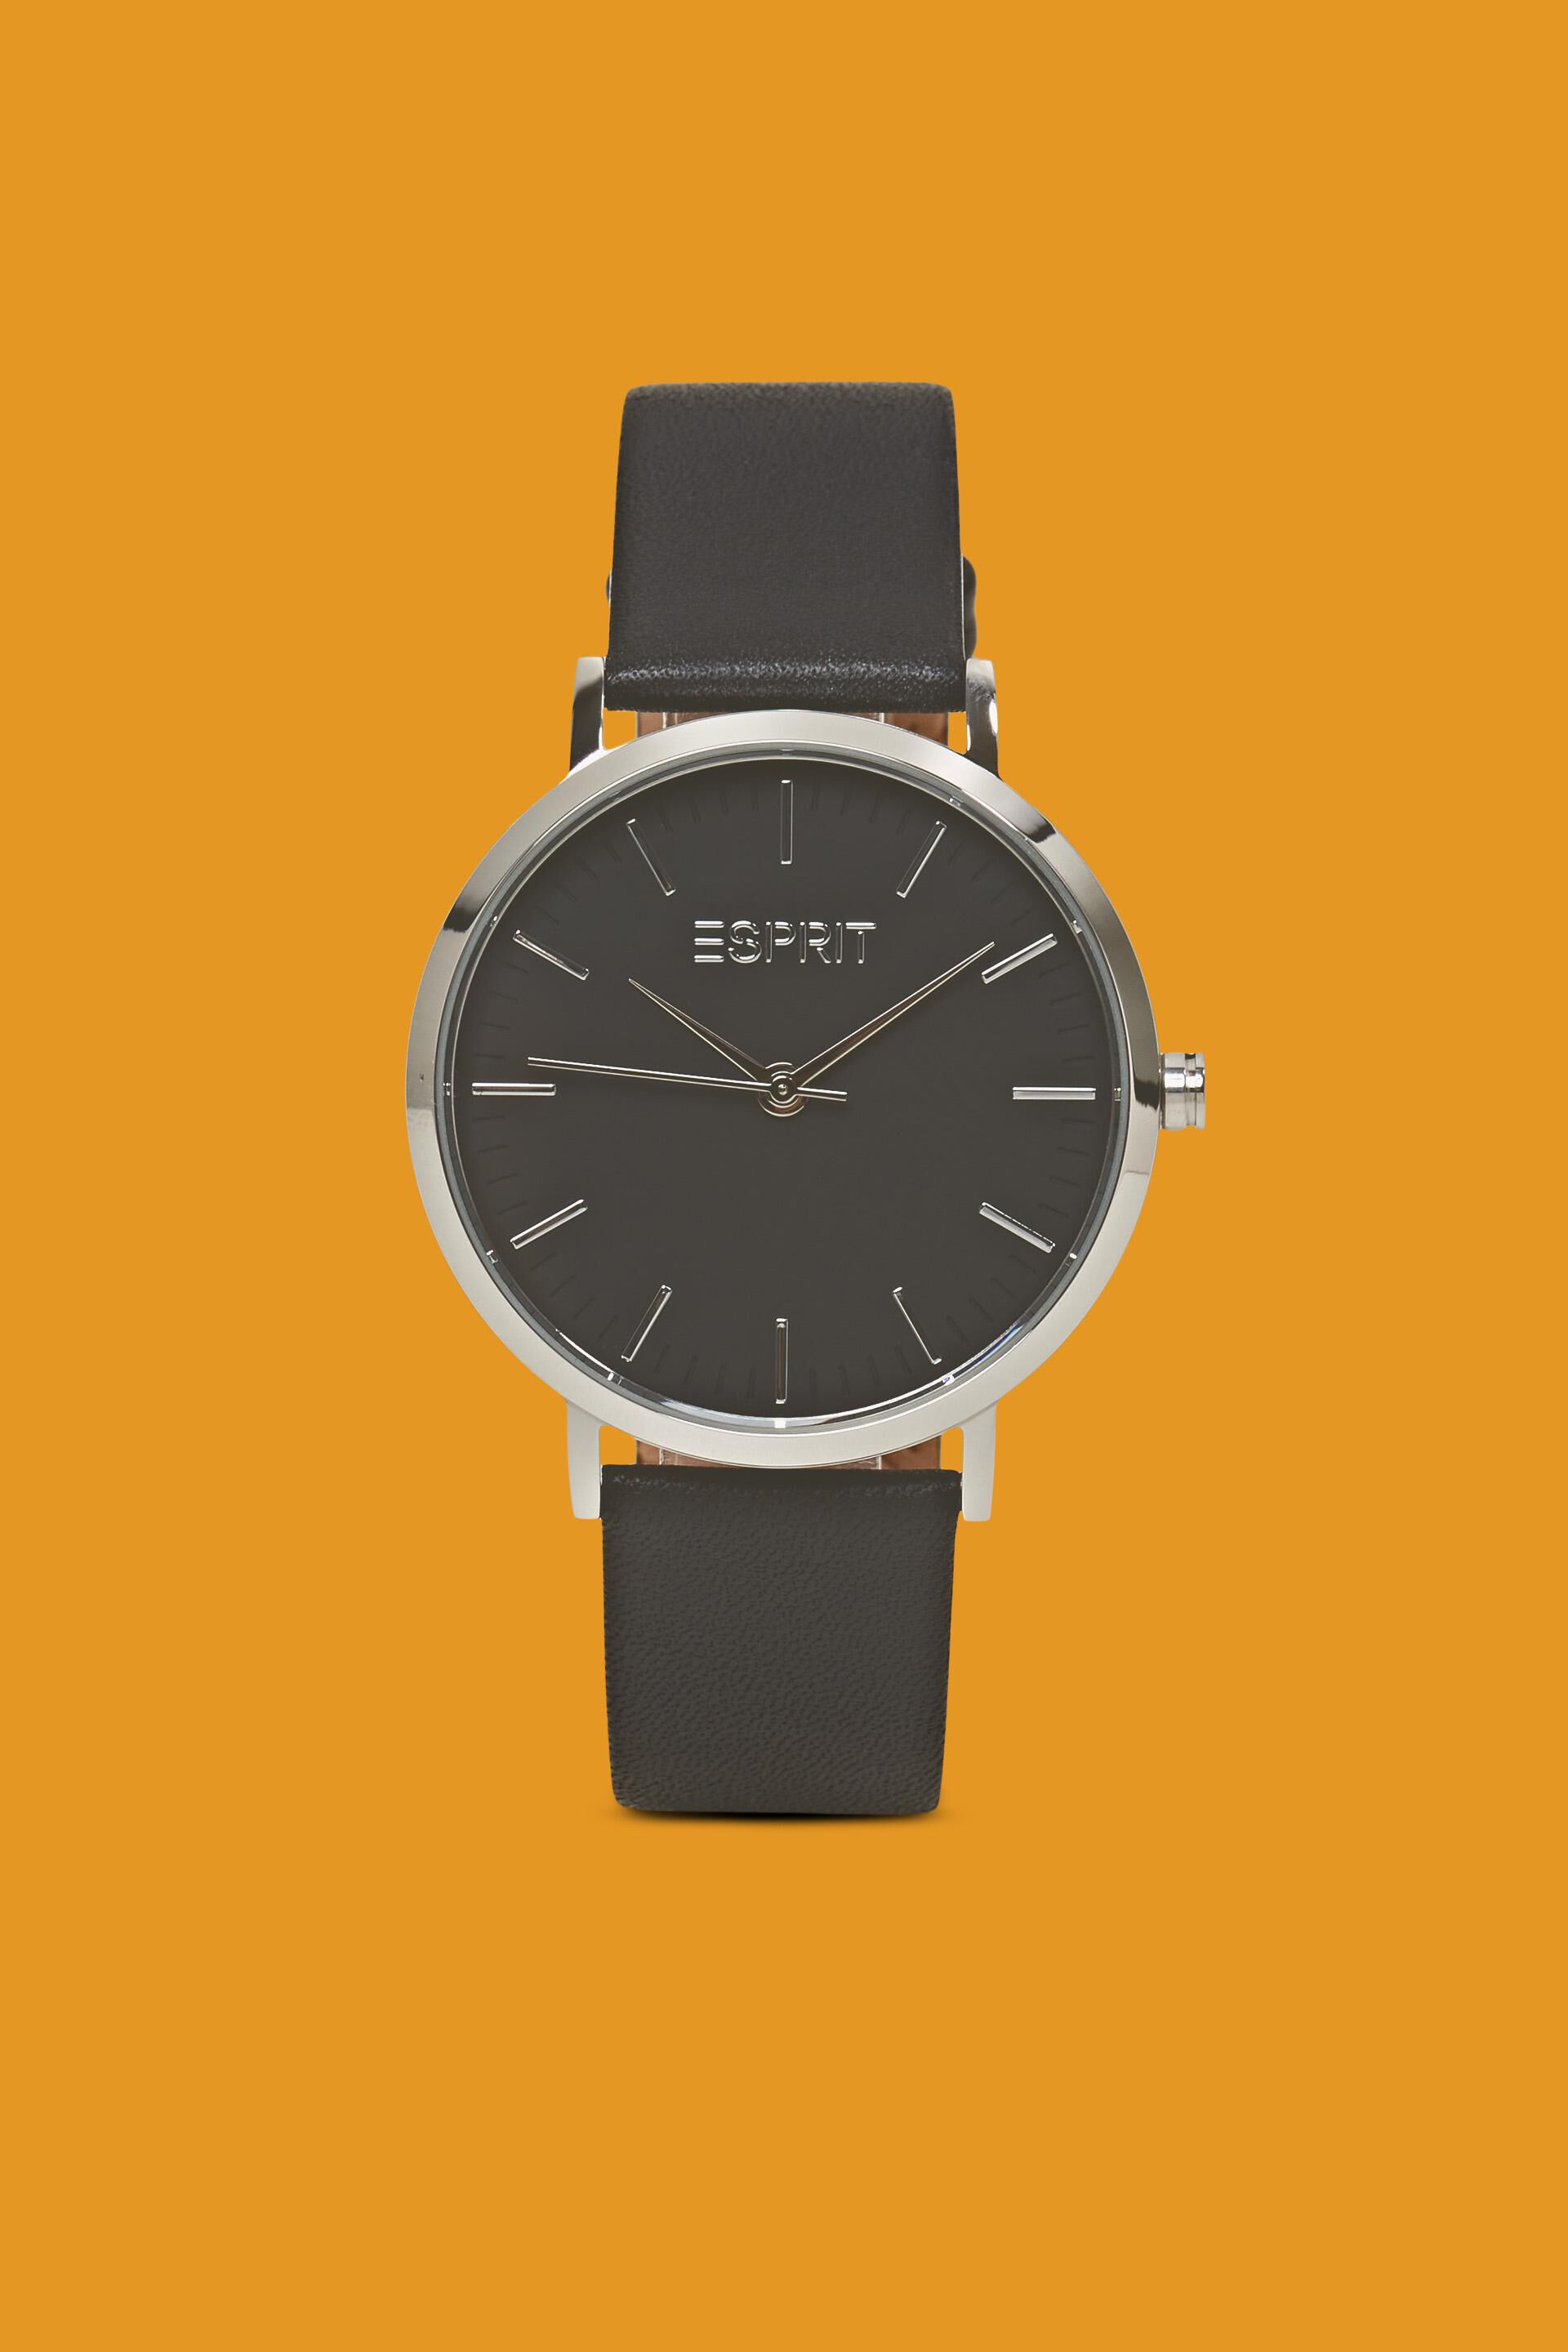 Esprit strap with leather watch a Stainless-steel